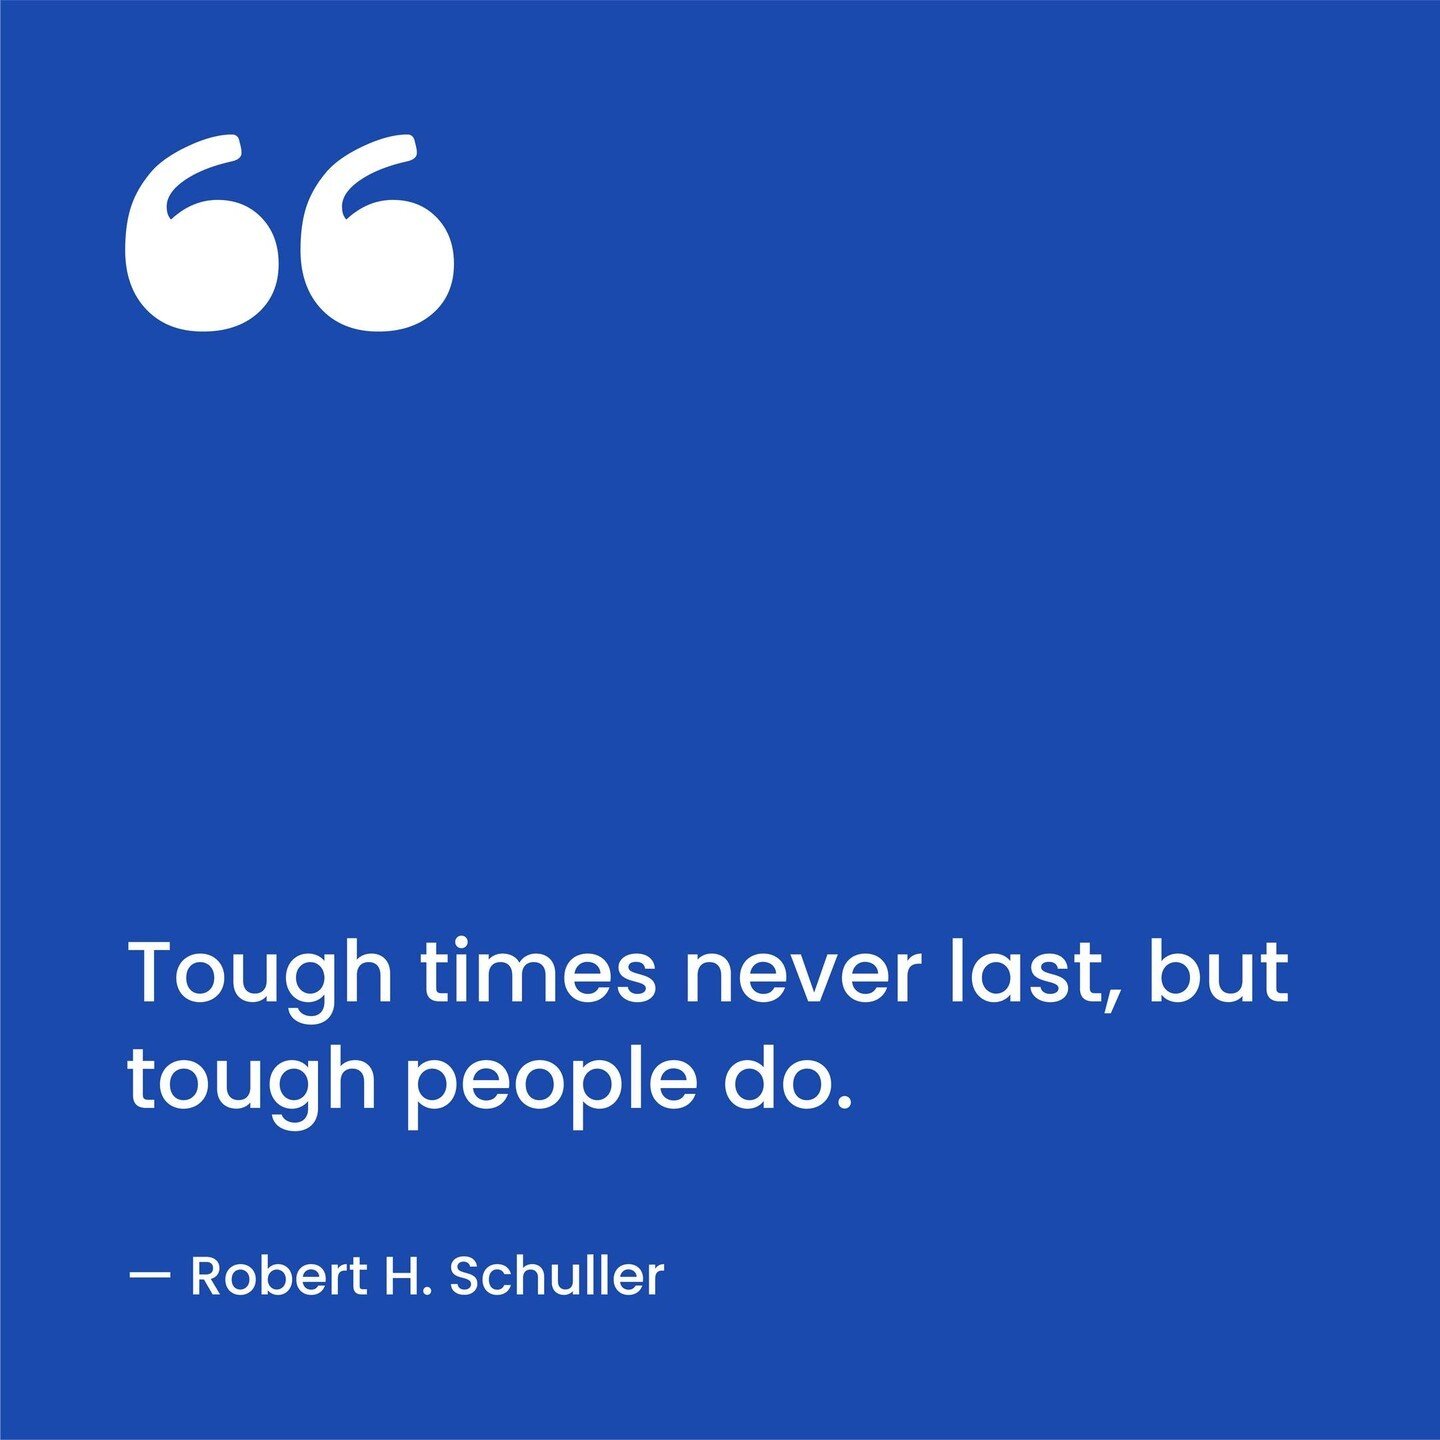 Quote of the day: &ldquo;Tough times never last, but tough people do.&rdquo; ⁠
- Robert H. Schuller⁠
⁠
#fertilityquotes #pregnancyquotes #quotestoliveby #quotes #quotesaboutlife #quotestagram